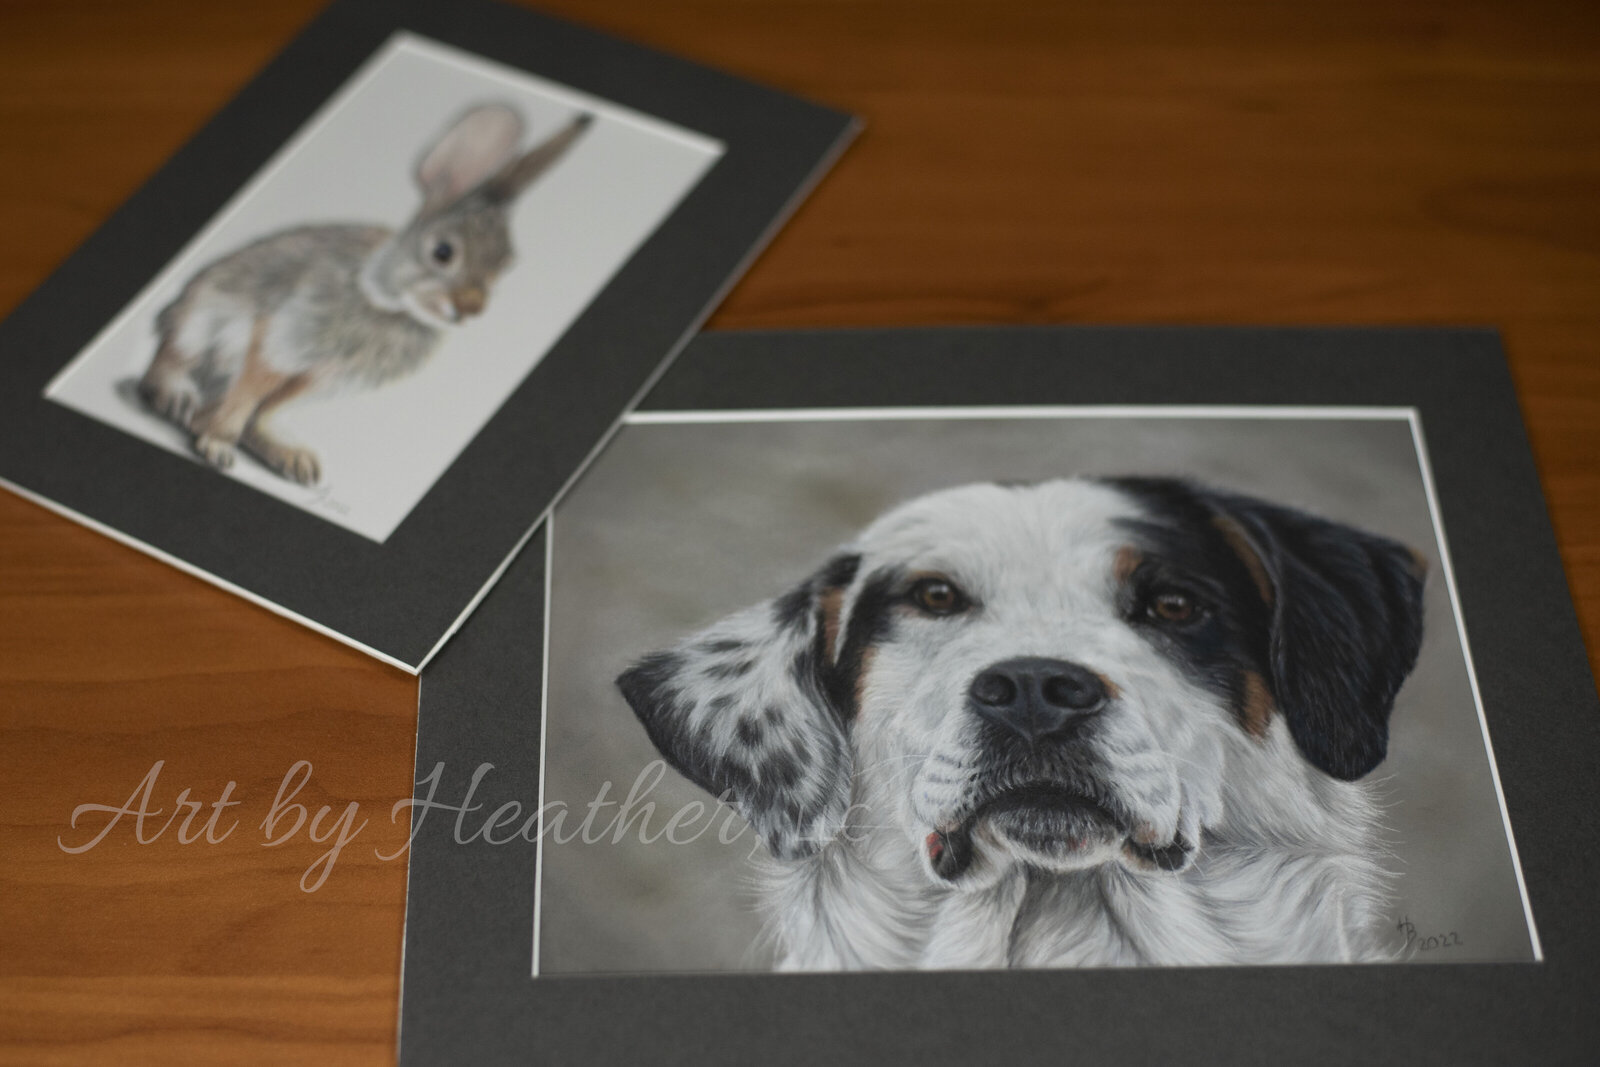 Custom portrait of a rabbit and an Australian Shephard framed and placed together